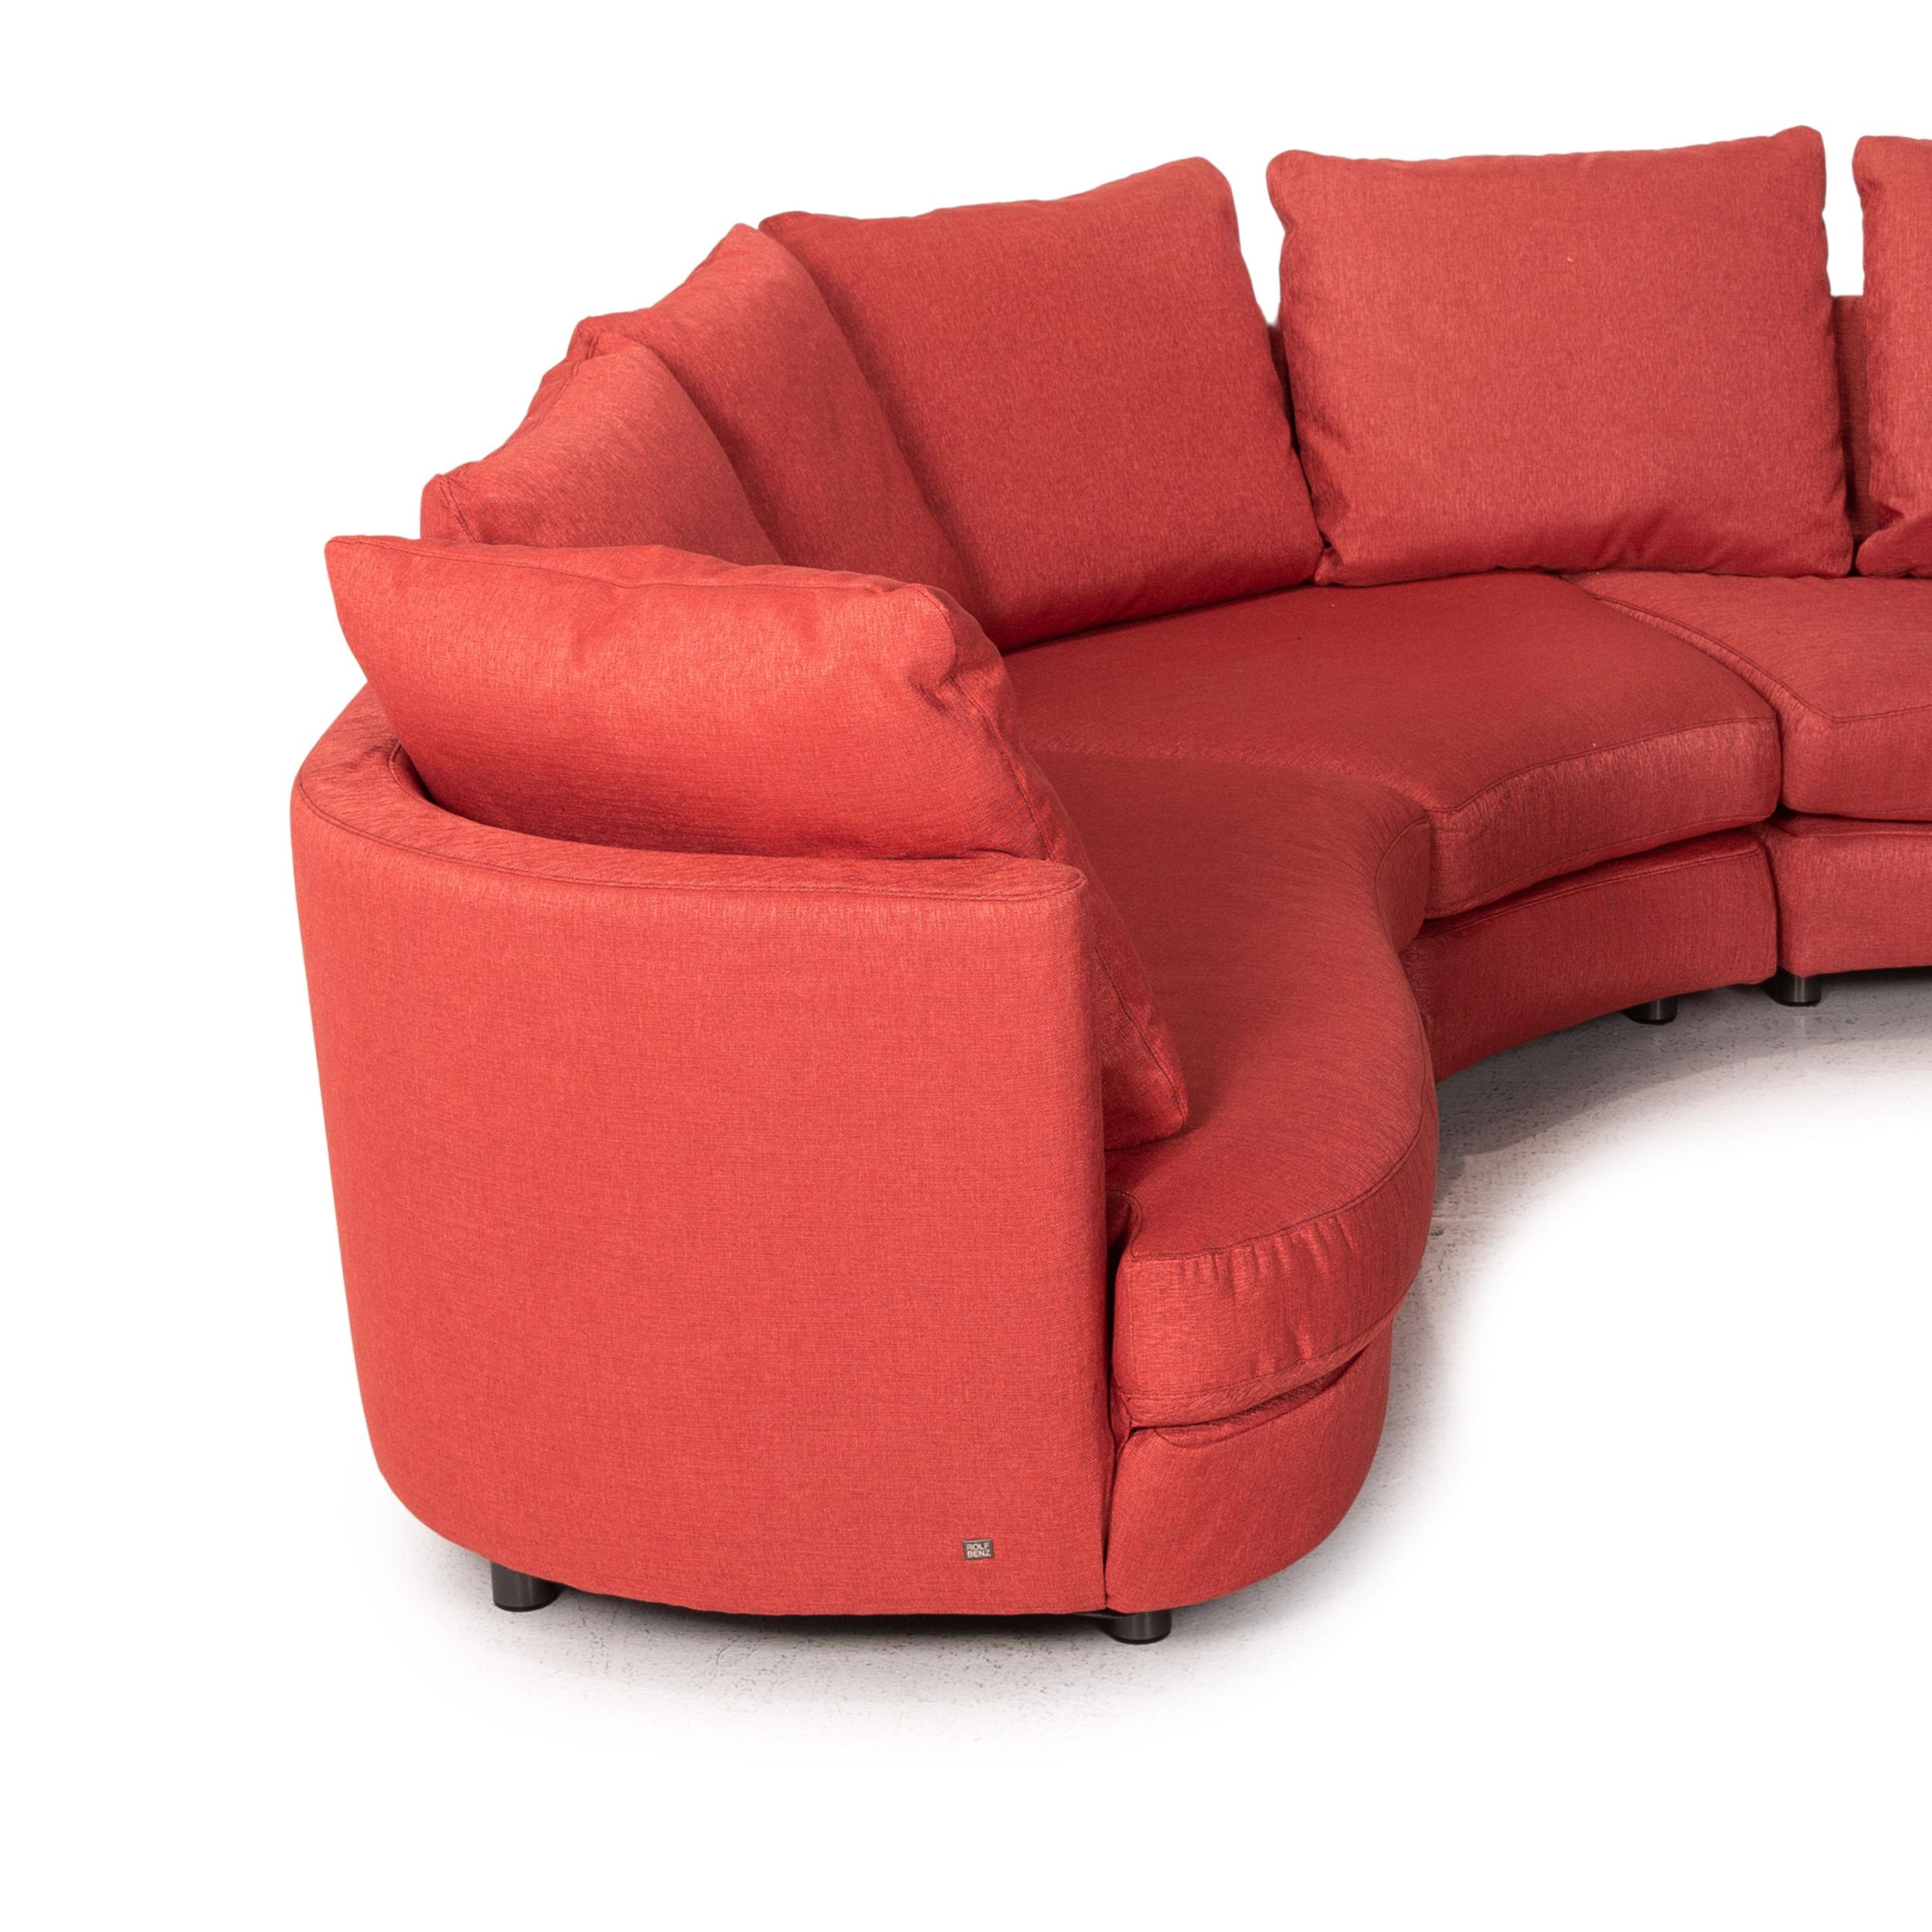 Rolf Benz Fabric Corner Sofa Red Sofa Couch In Fair Condition For Sale In Cologne, DE